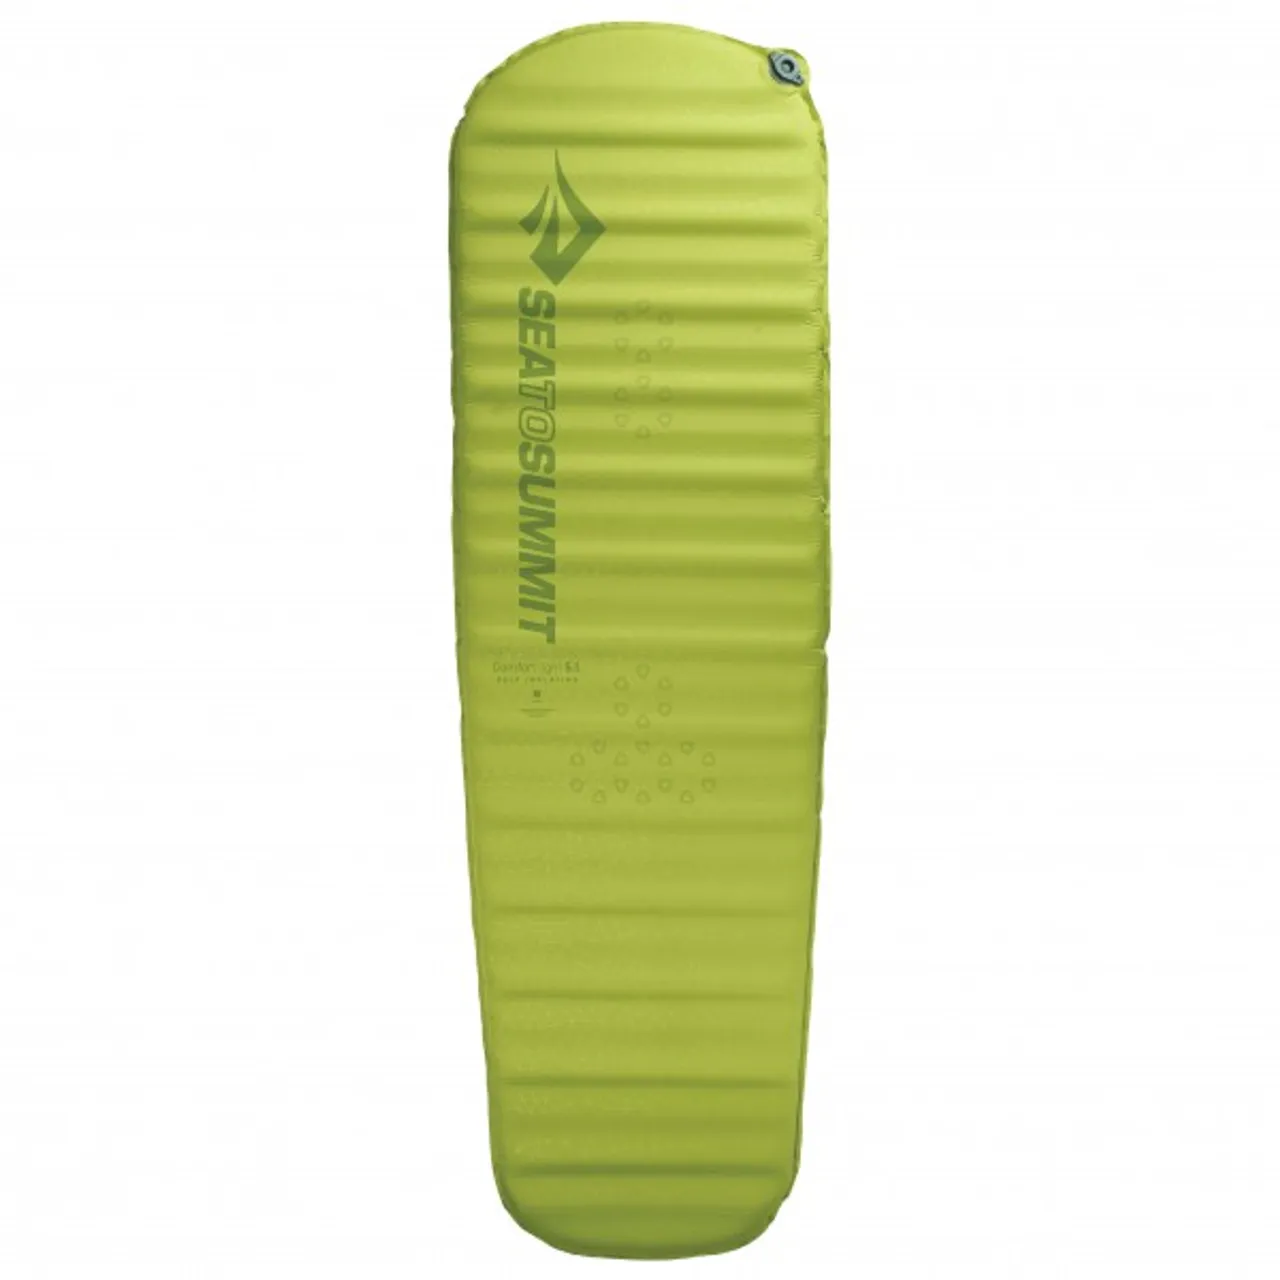 Sea to Summit - Comfort Light Self Inflating - Sleeping mat size Small, olive